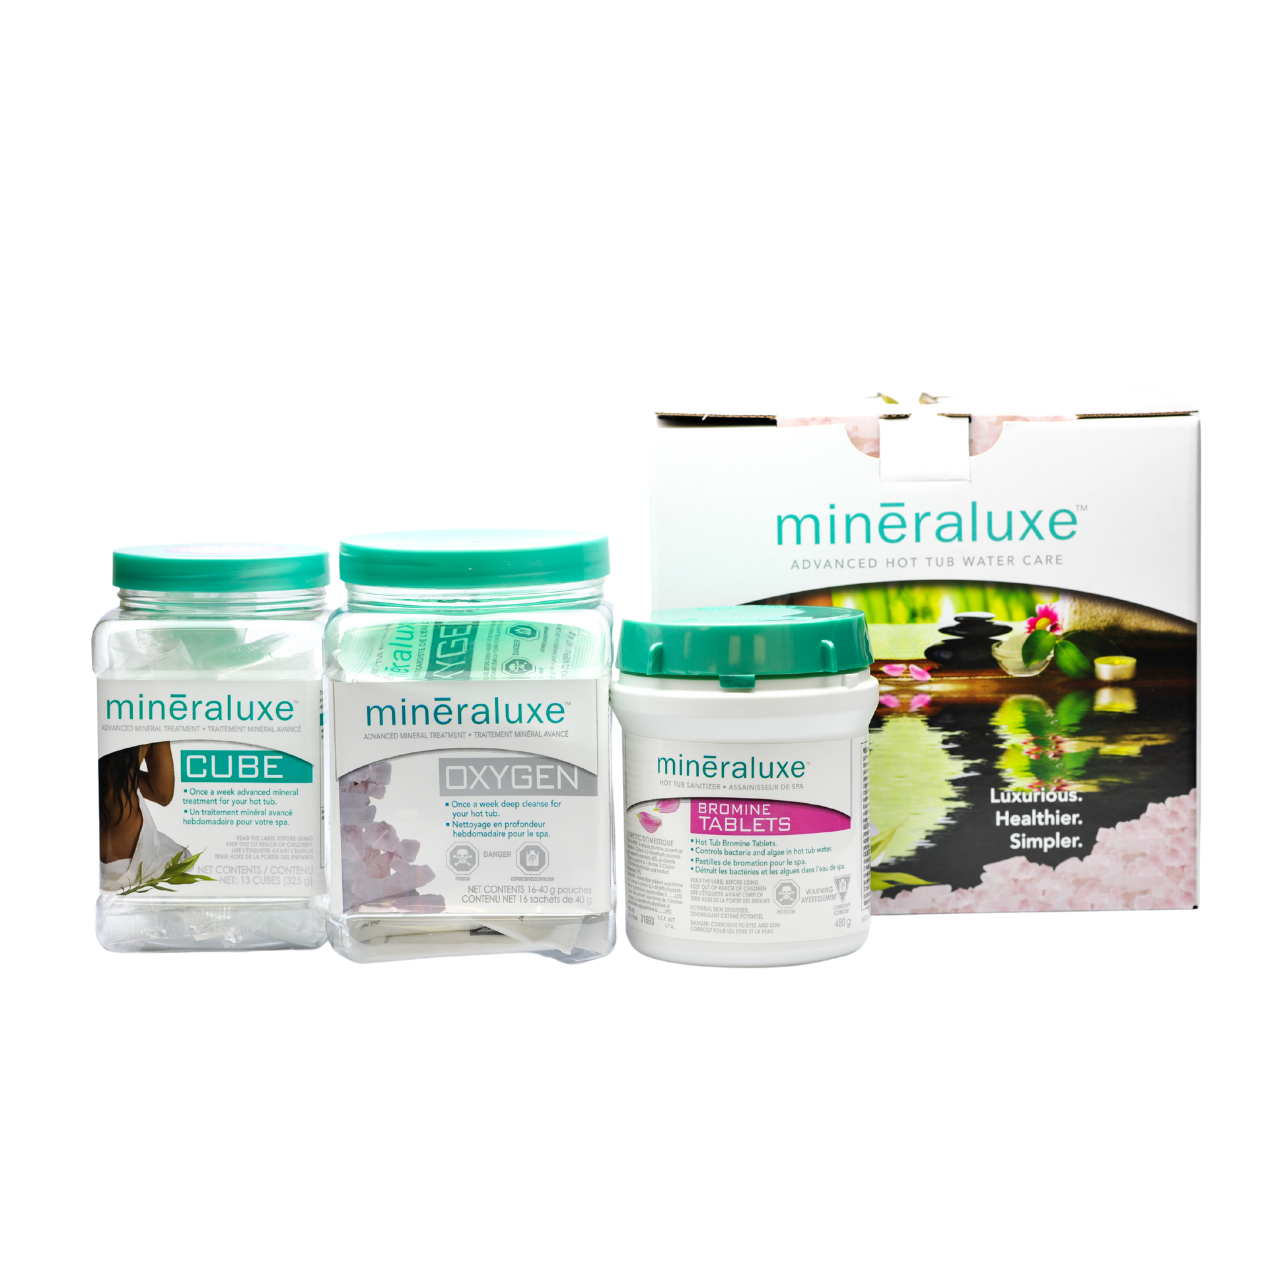 Mineraluxe™ 3 Month Bromine Tablet Mineraluxe System